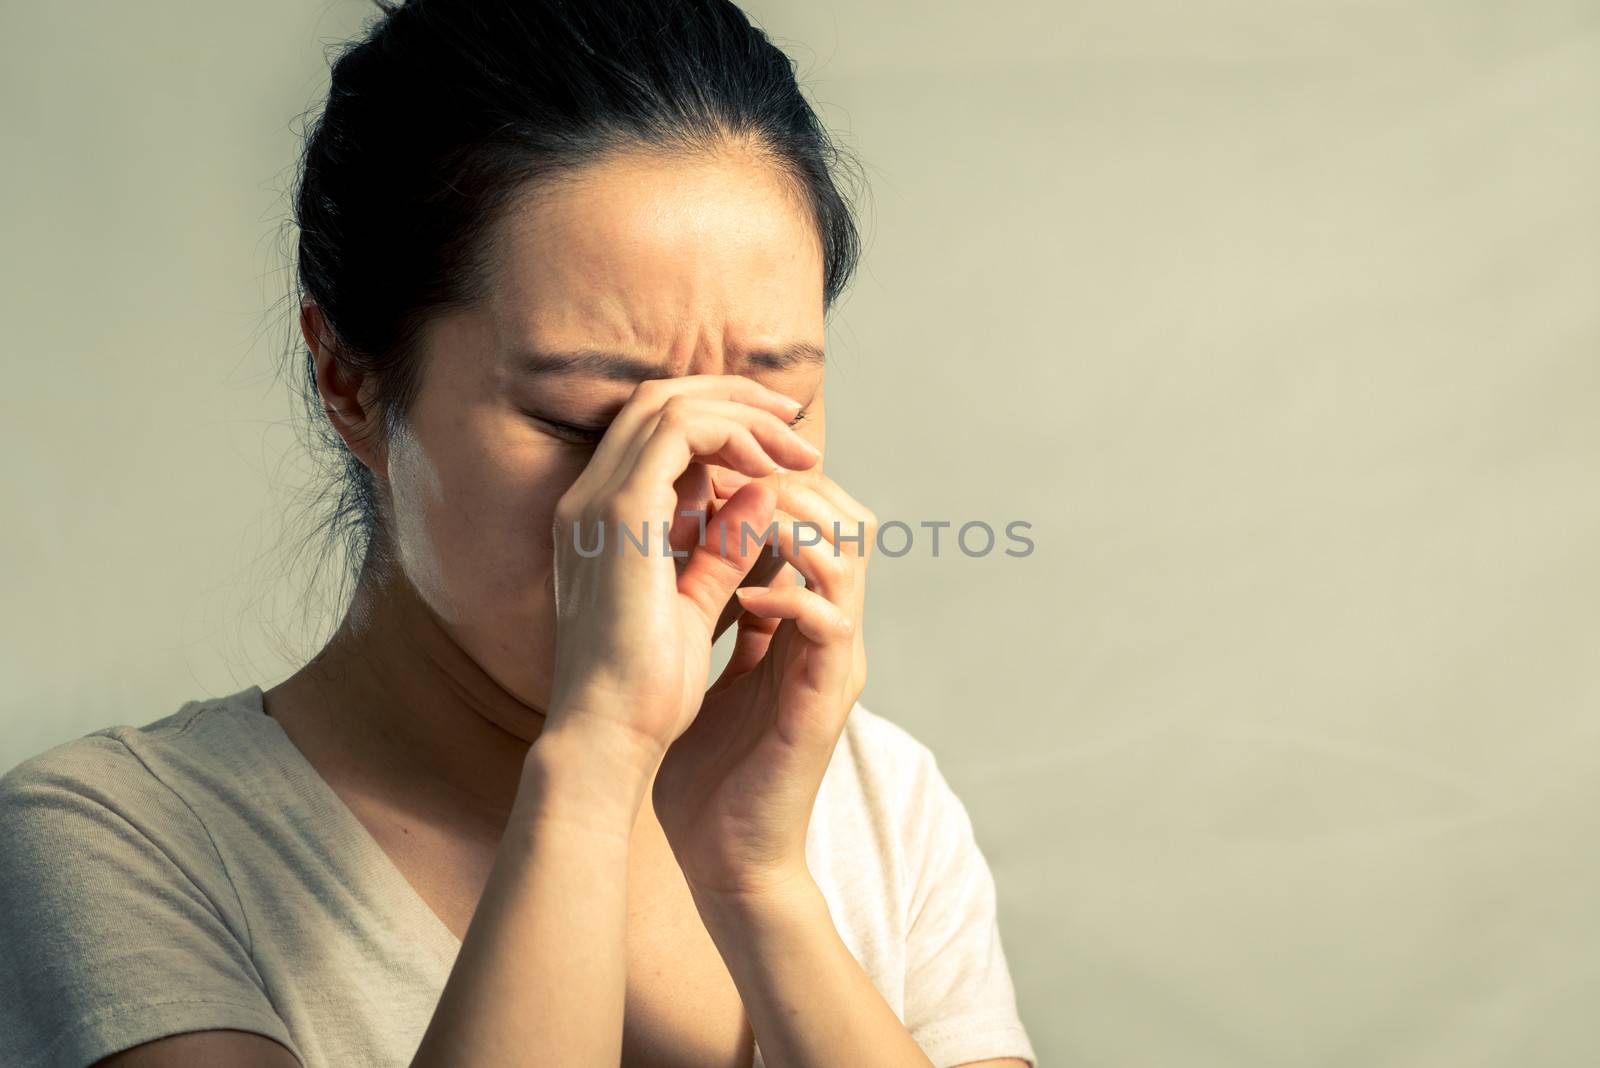 Portrait of young woman crying desperately, with fashion tone and background